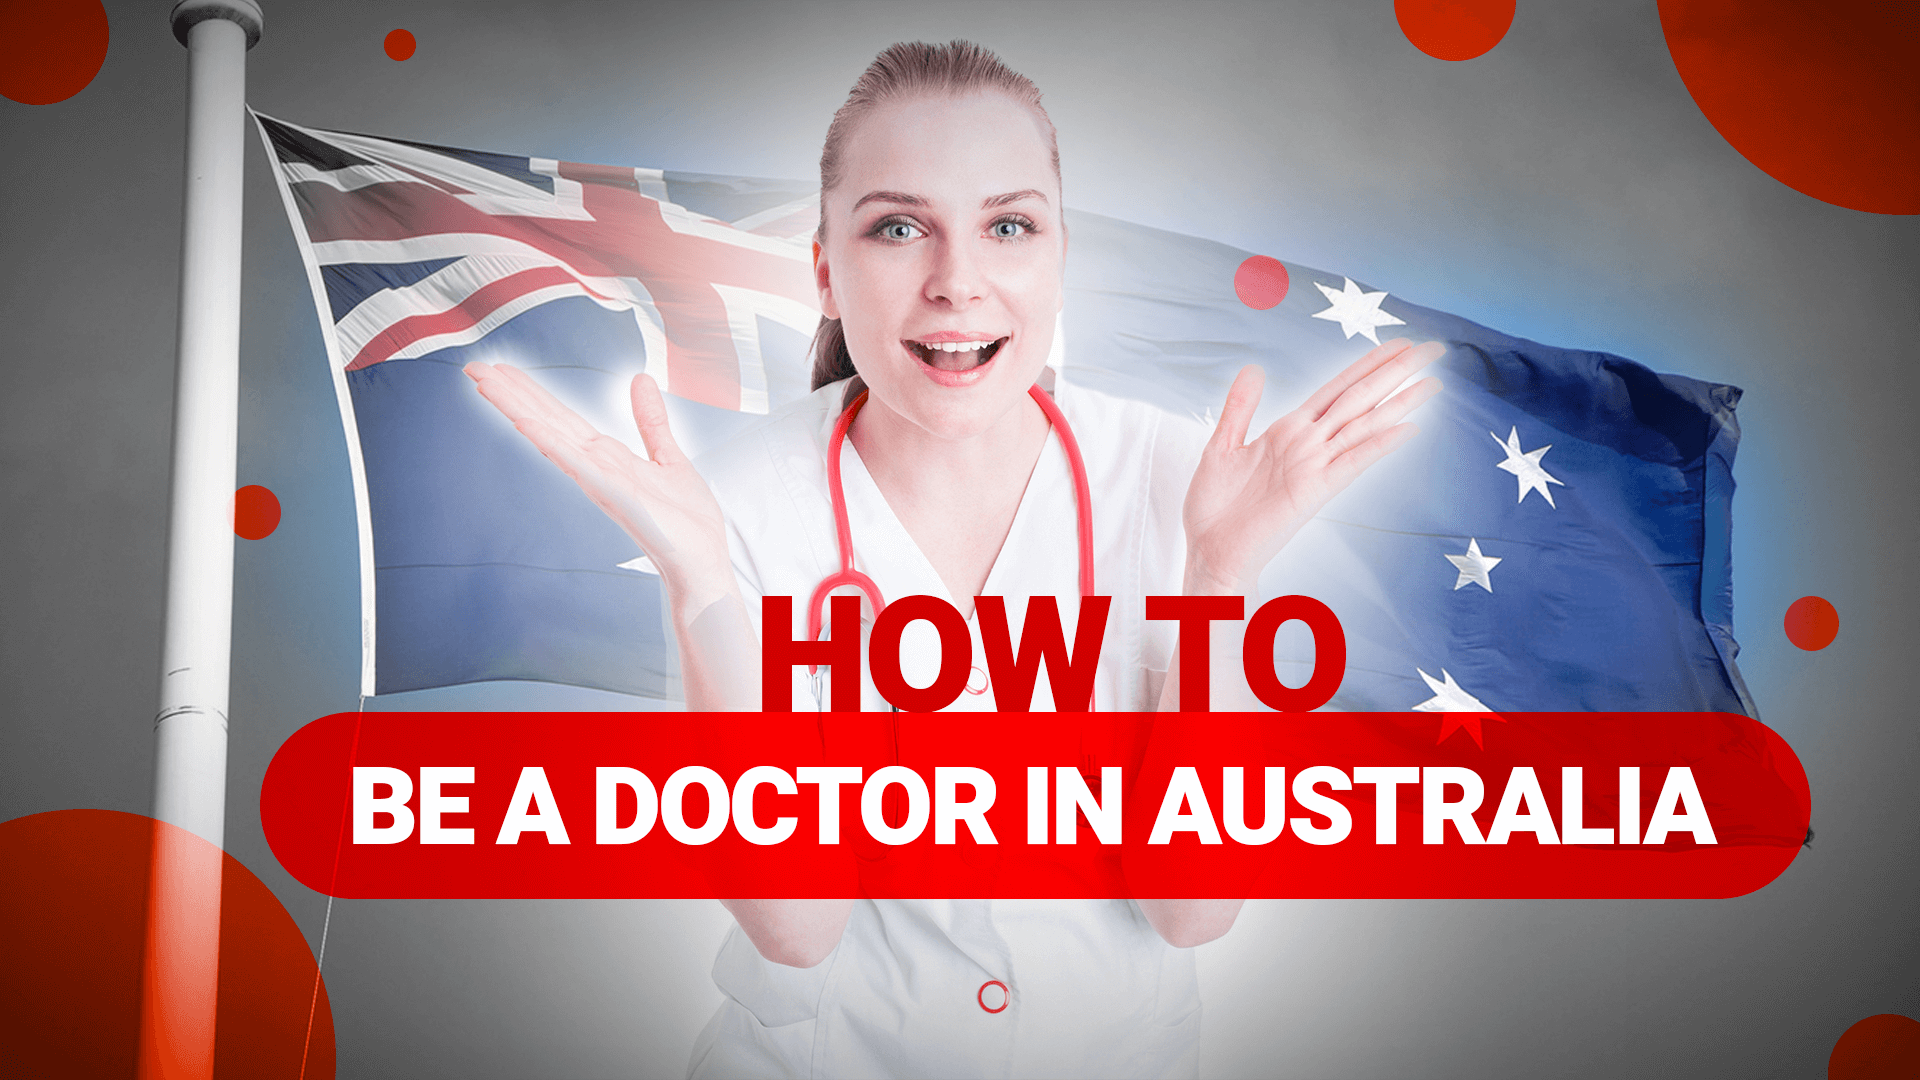 What do I need before I can work as a Doctor in Australia?